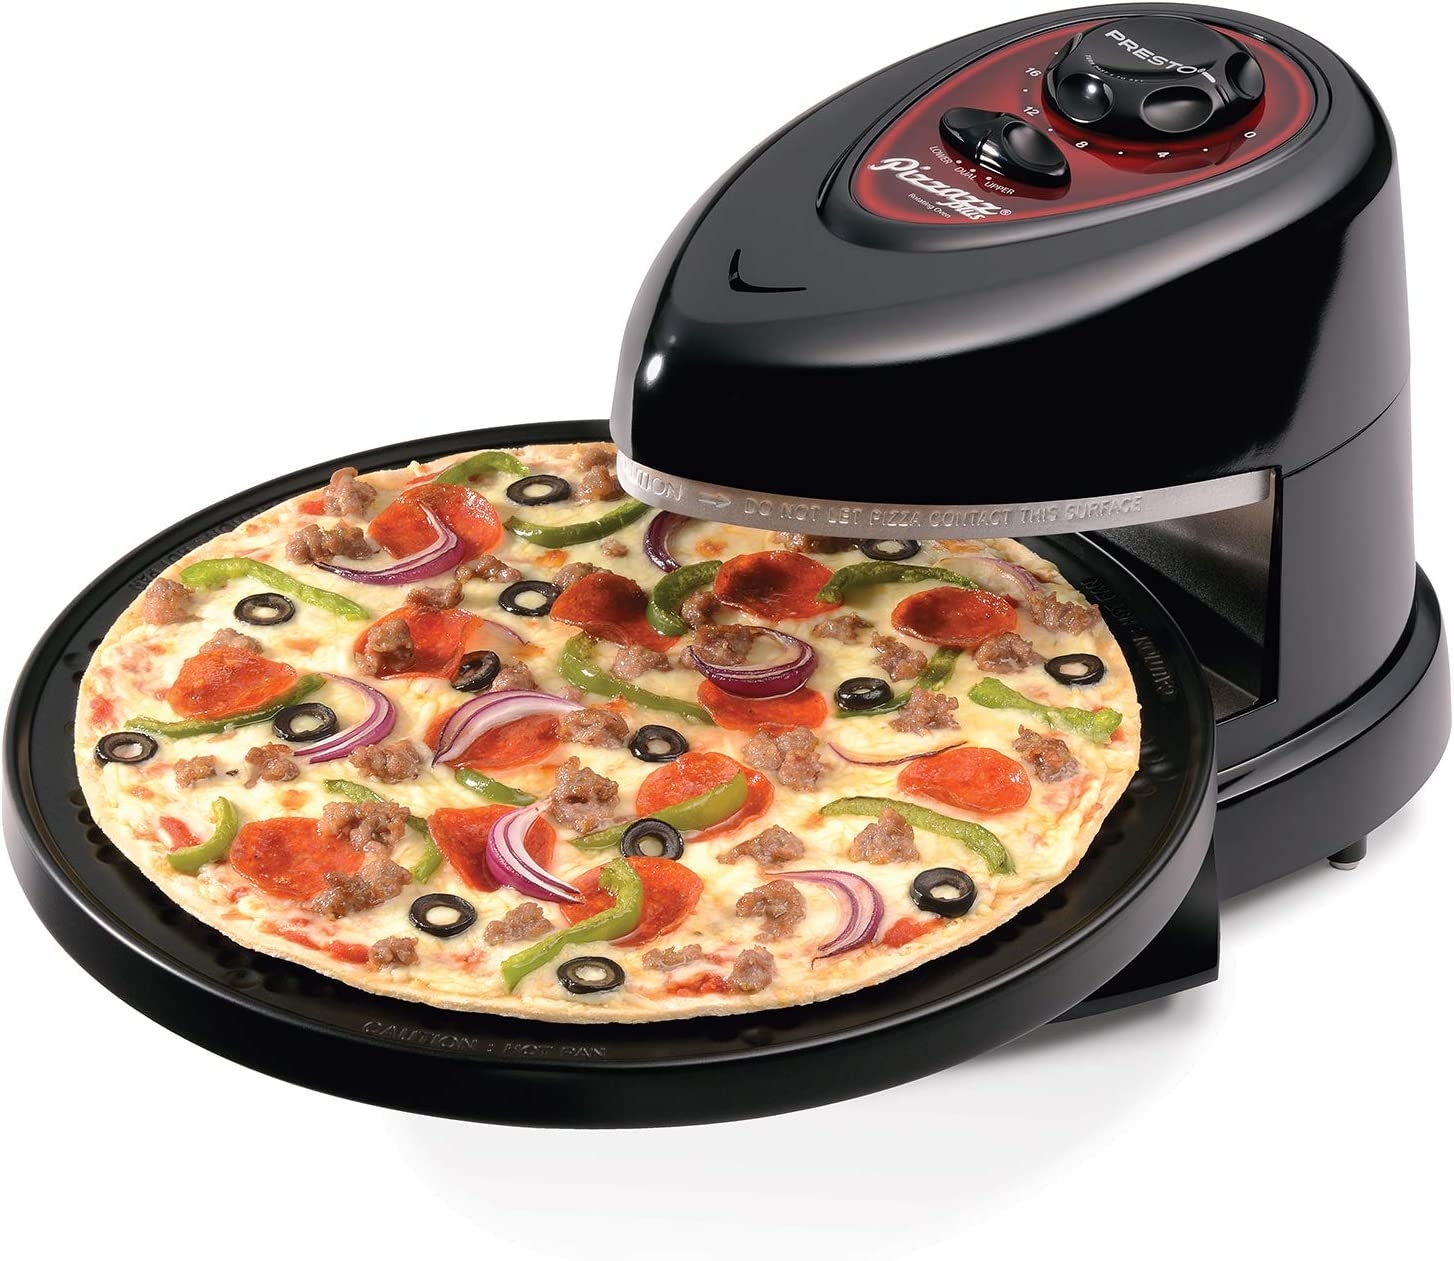 Presto 03430 Pizzazz Plus Rotating Oven Import To Shop ×Product customization General Description Gallery Reviews Variations